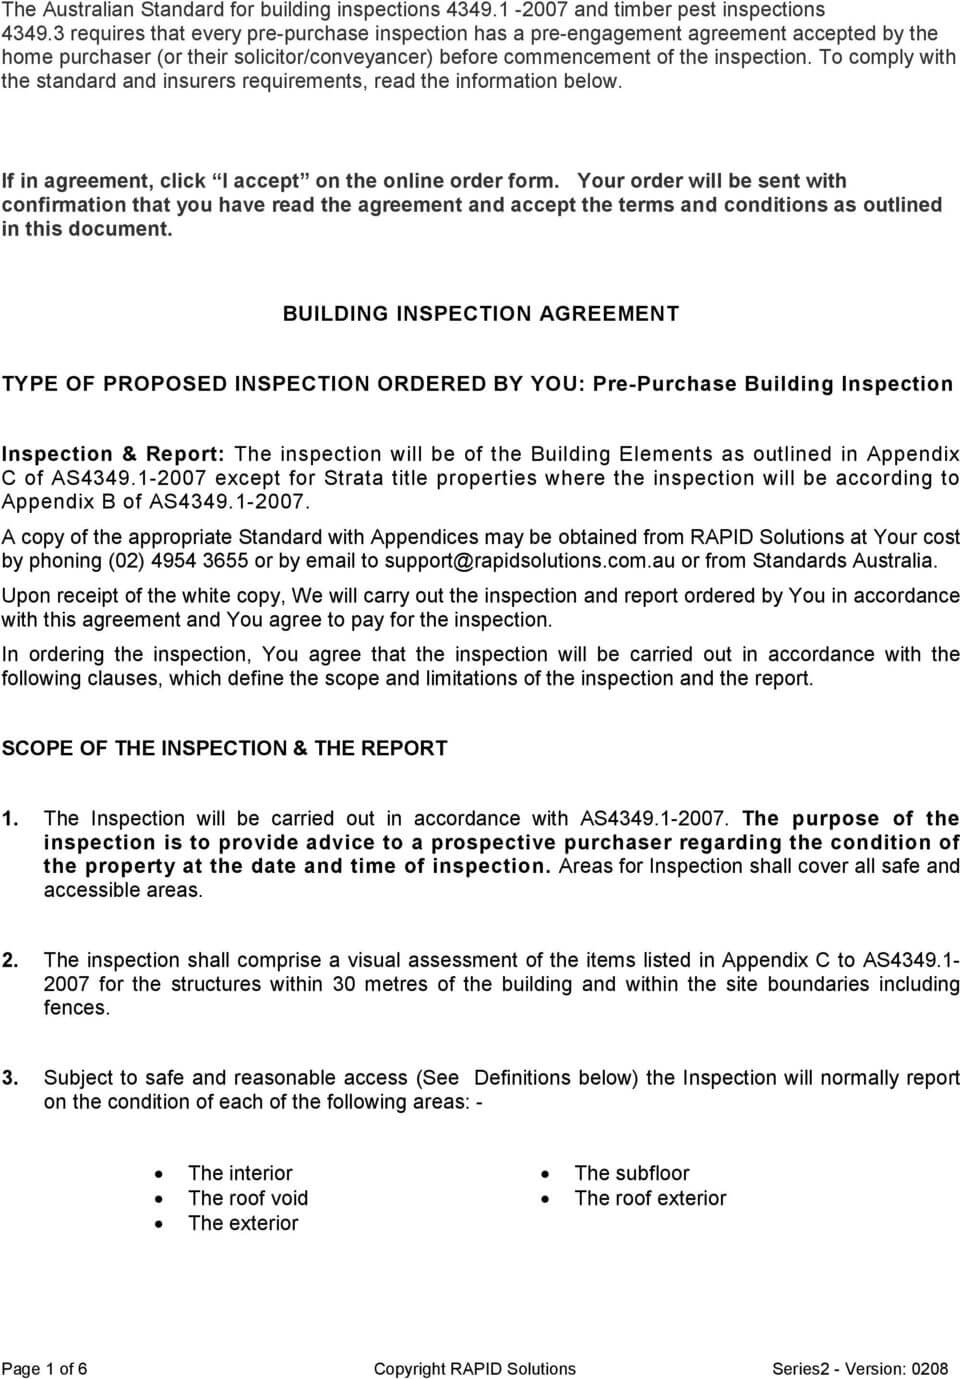 Building Inspection Agreement. Type Of Proposed Inspection For Pre Purchase Building Inspection Report Template